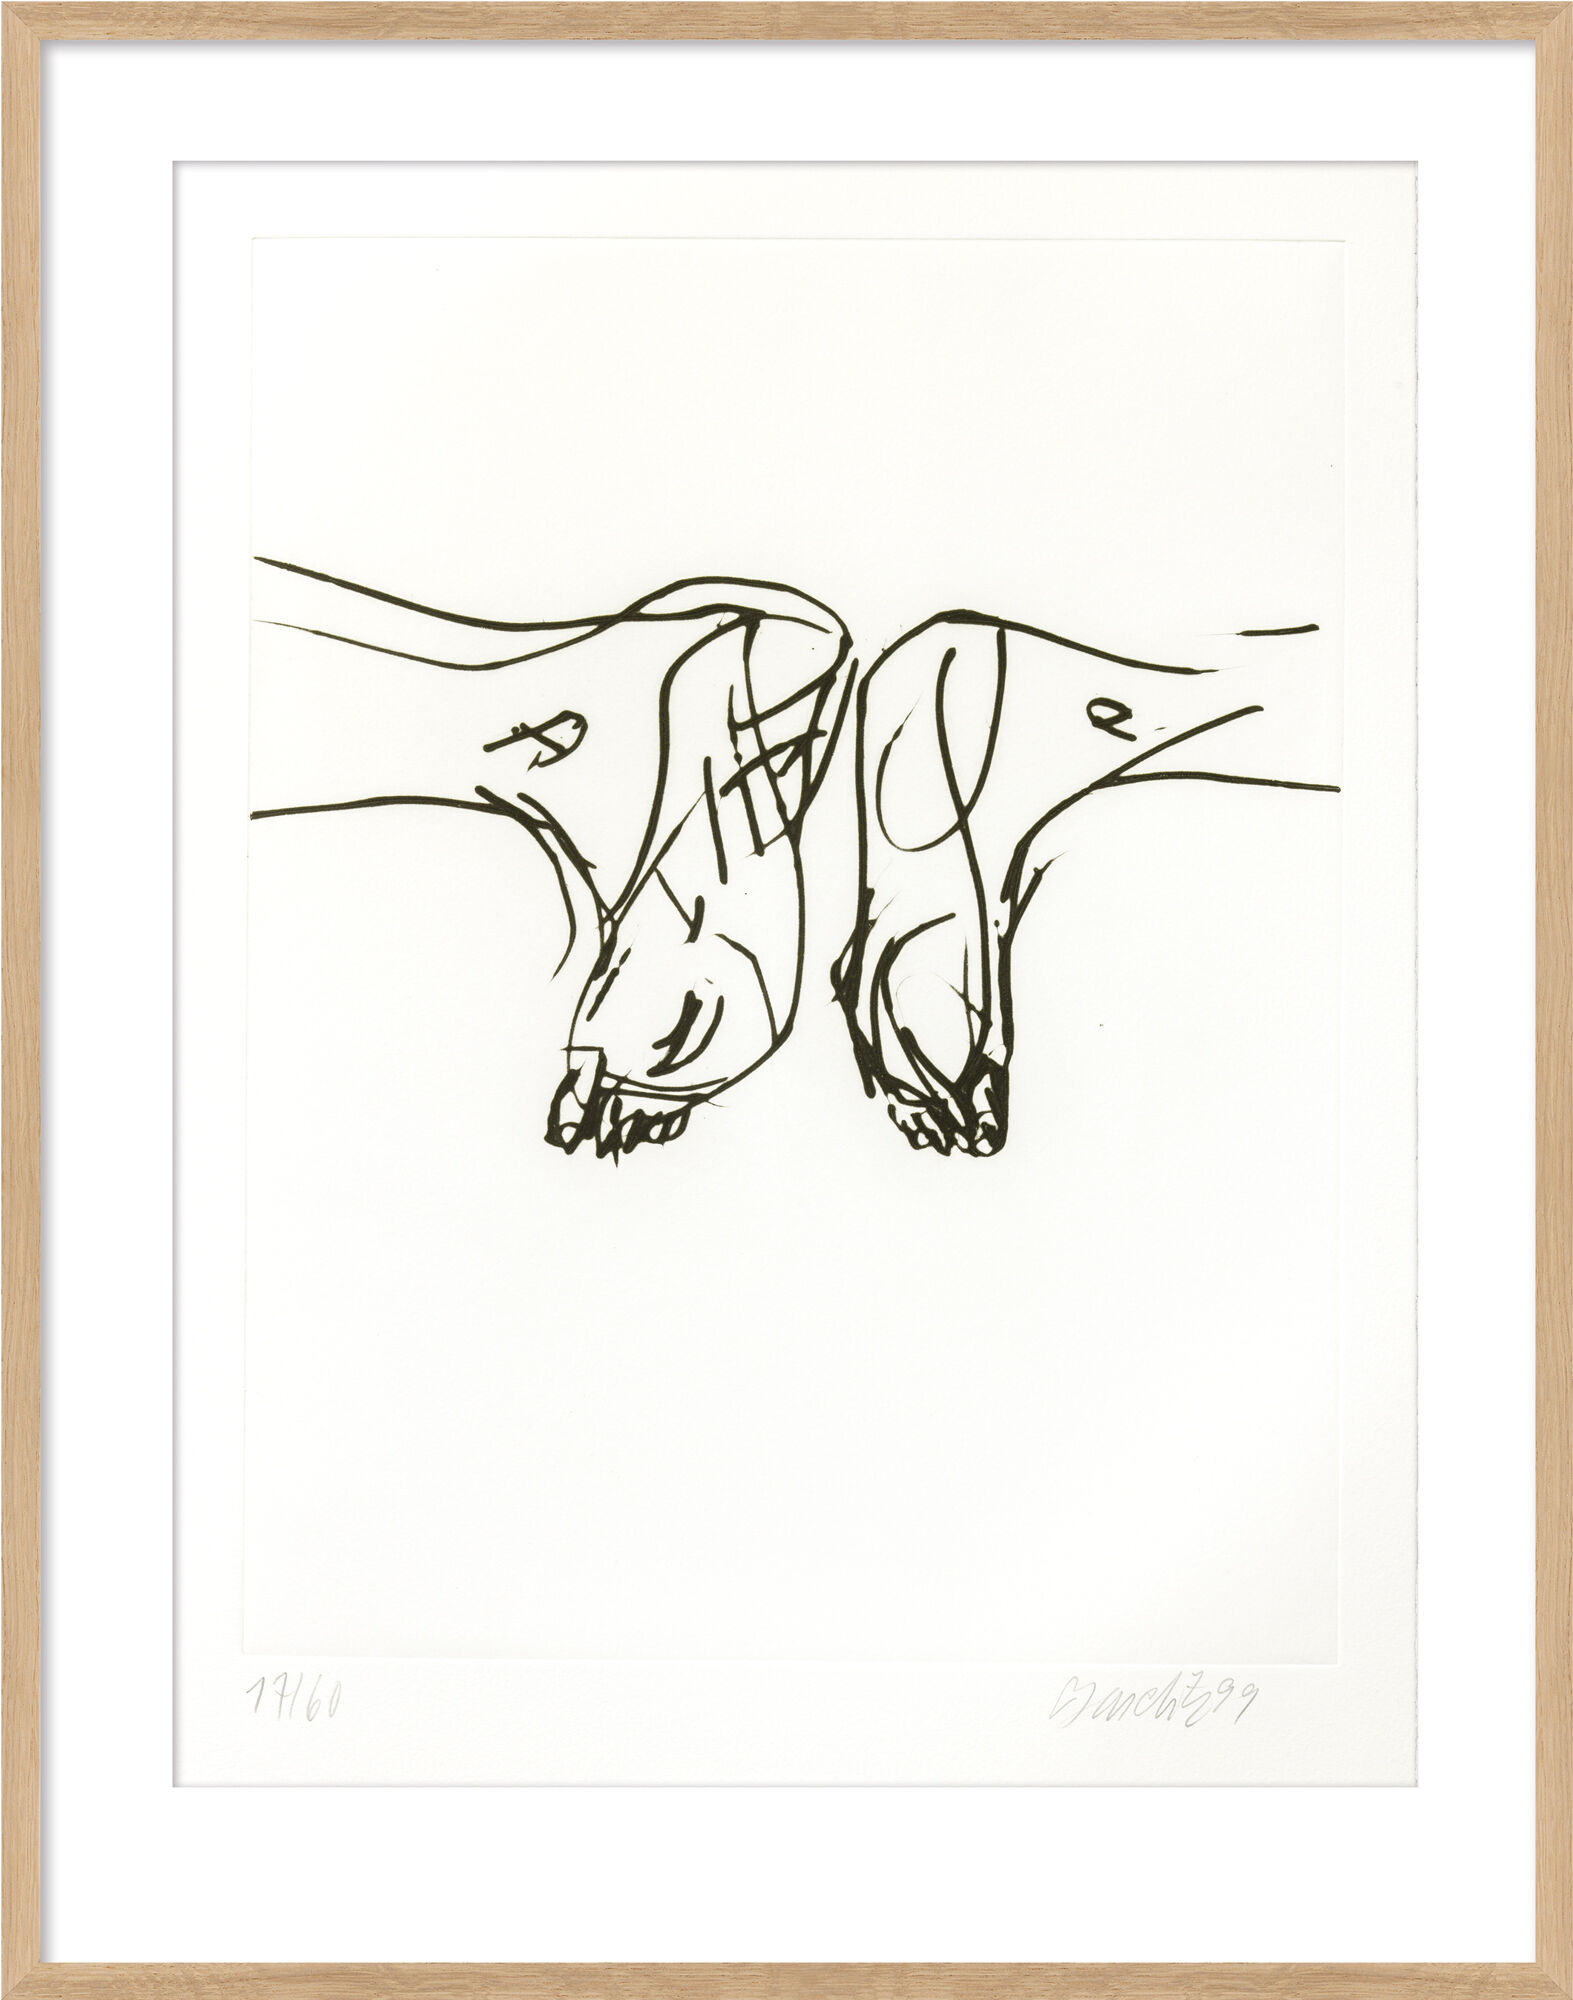 Picture "Untitled VIII" from the portfolio "Signs" (1999/2000) by Georg Baselitz